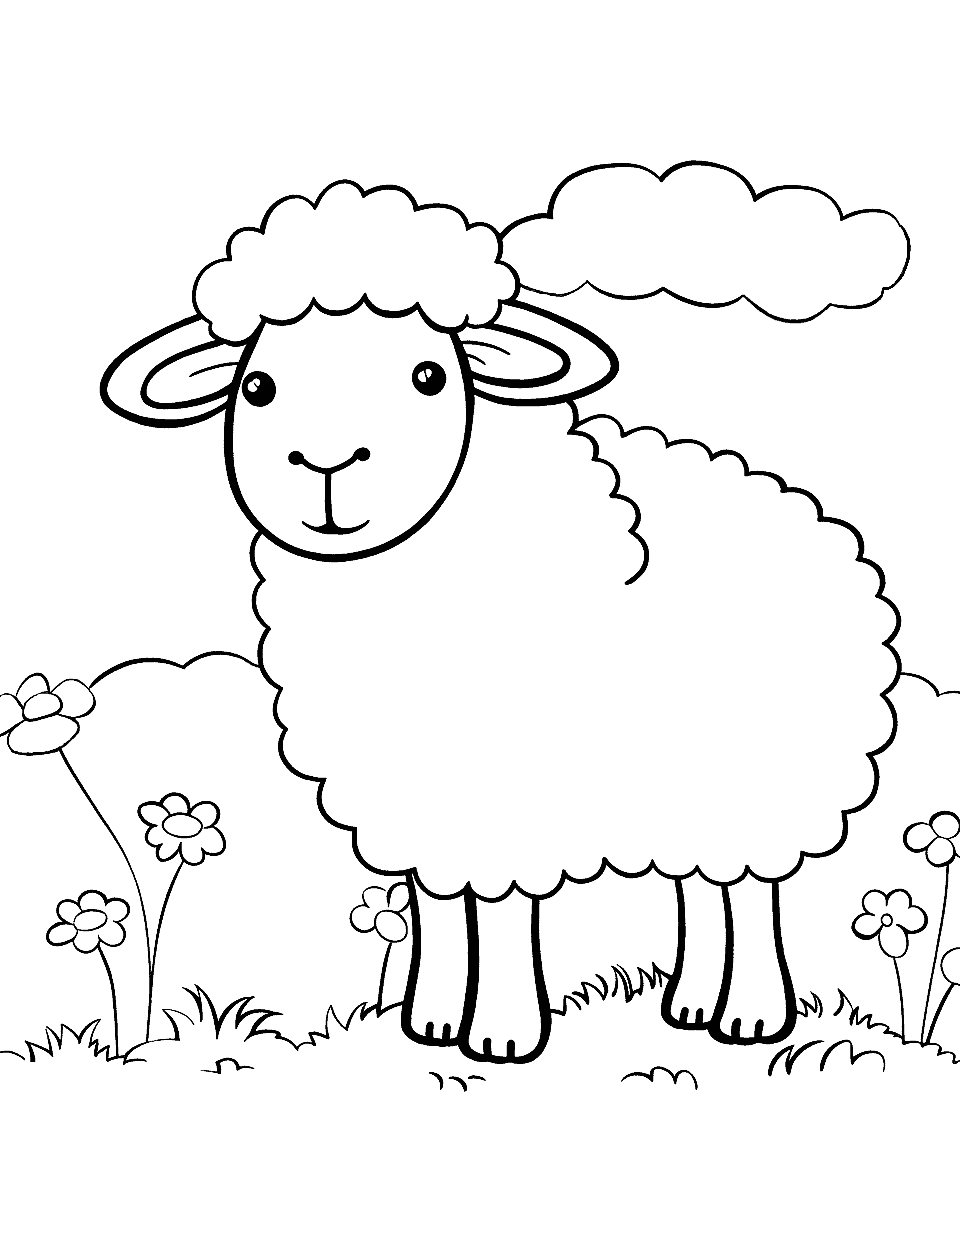 Fluffy Sheep in a Meadow Cute Coloring Page - A fluffy sheep peacefully grazing in a green meadow.